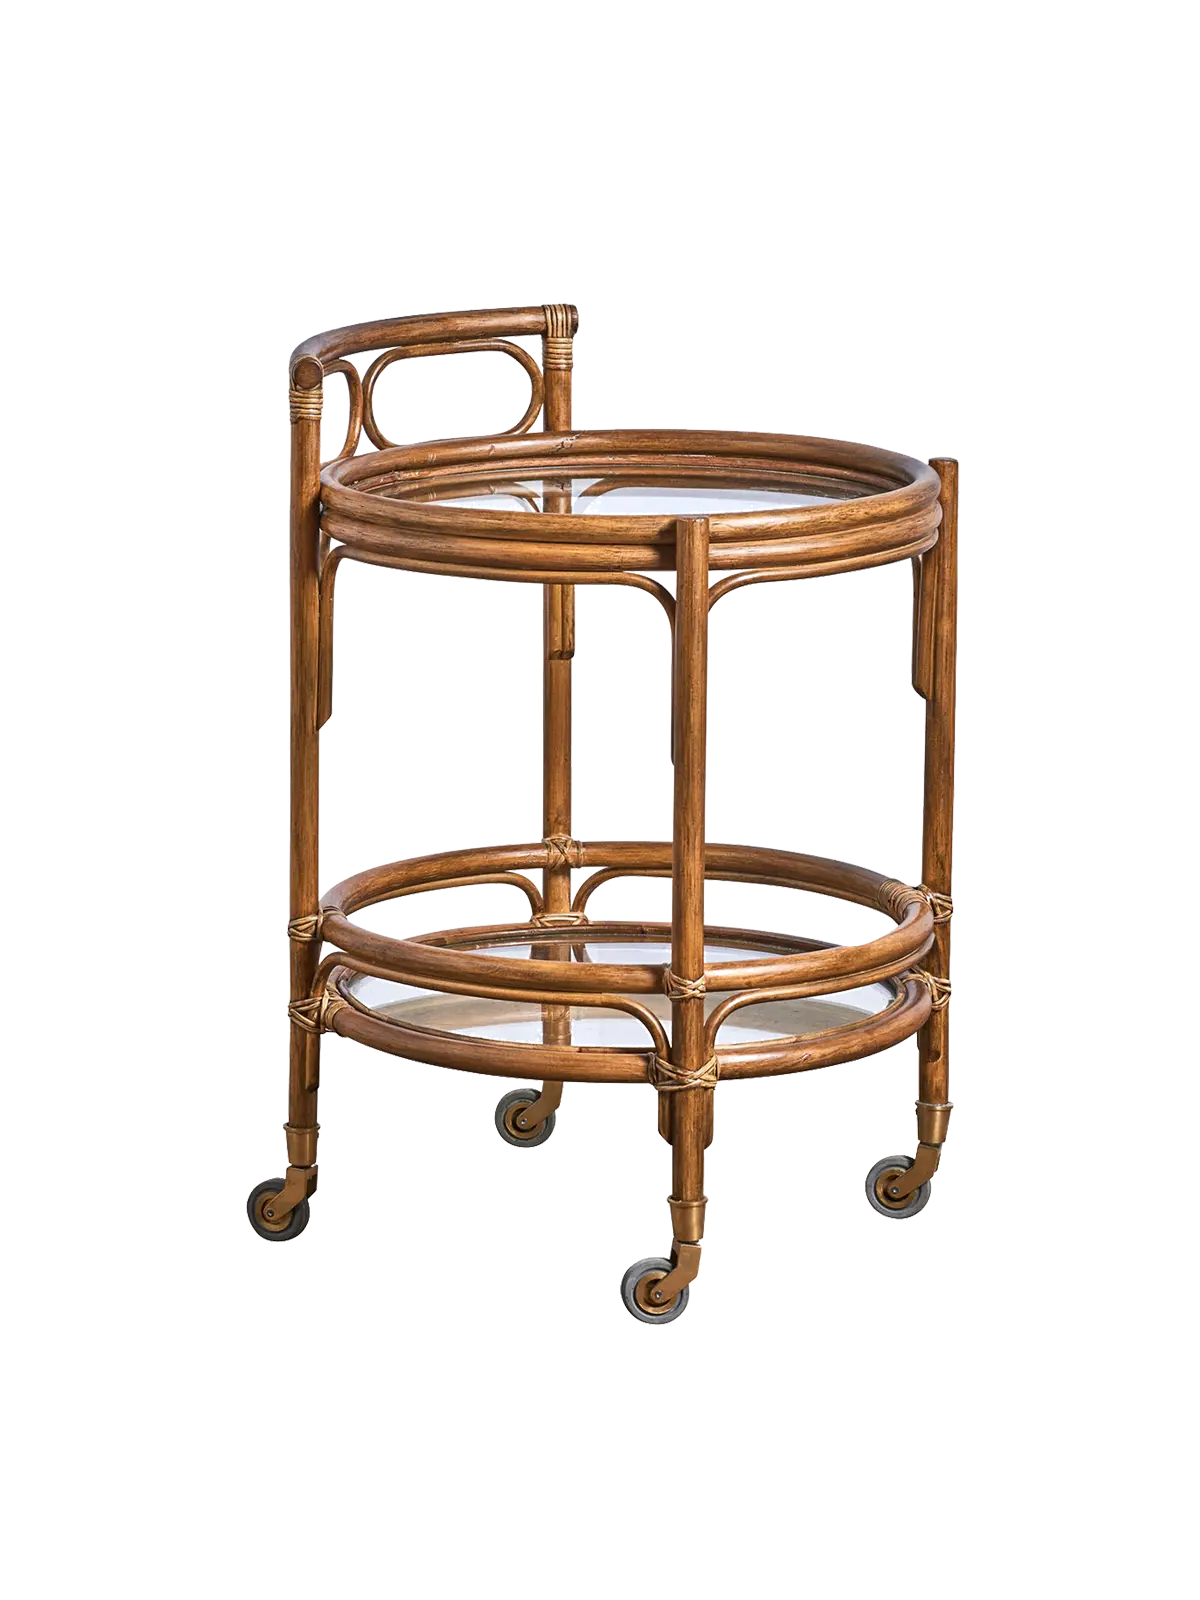 Sika Romeo Rattan Trolley Antique May Time